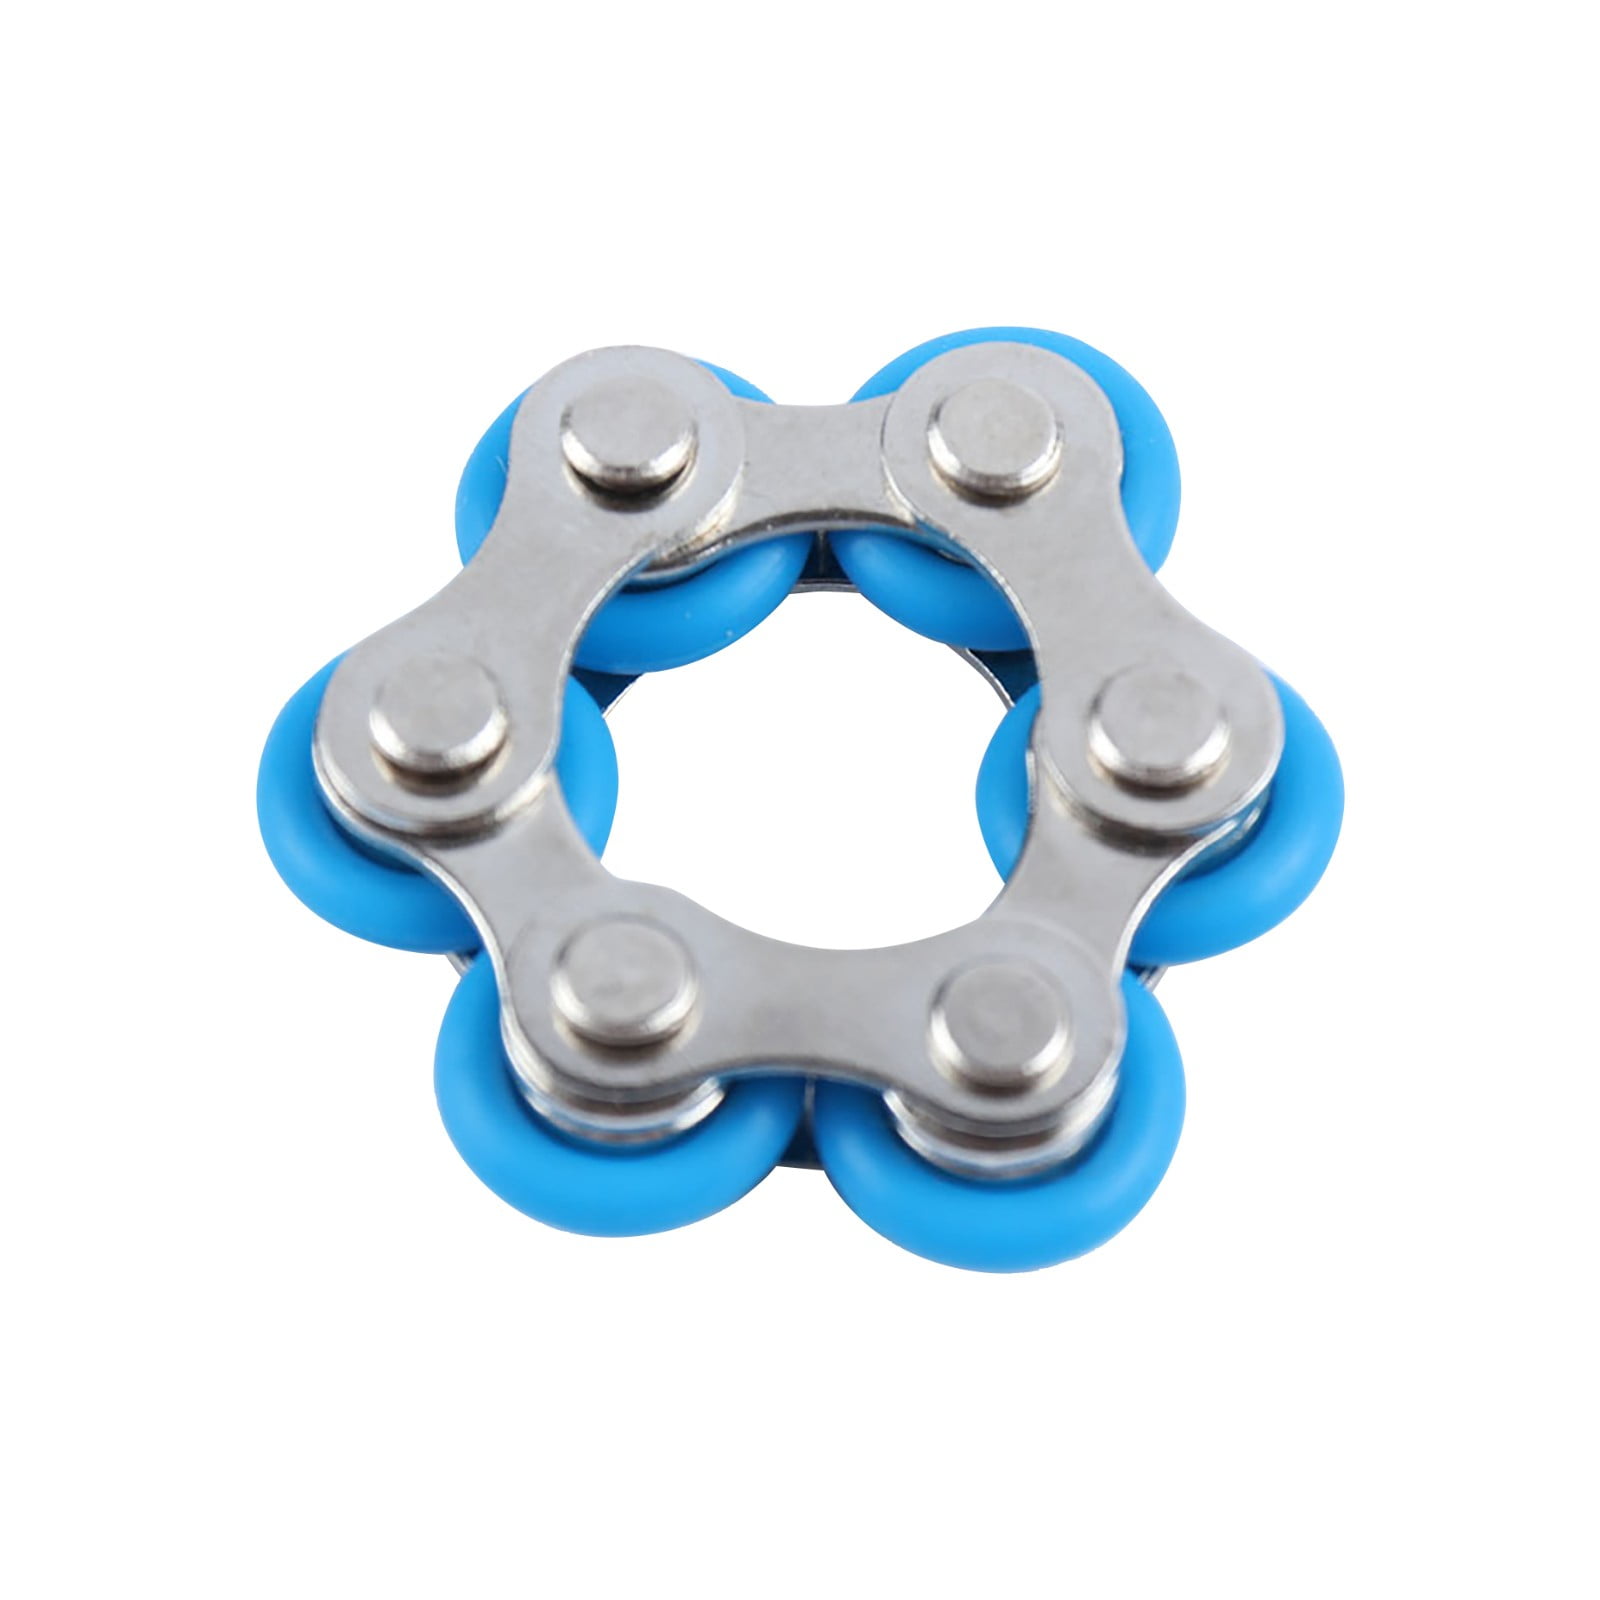 ADD 10 Pieces Roller Fidget Toy Stress Relief Perfect for ADHD Kids Adults 